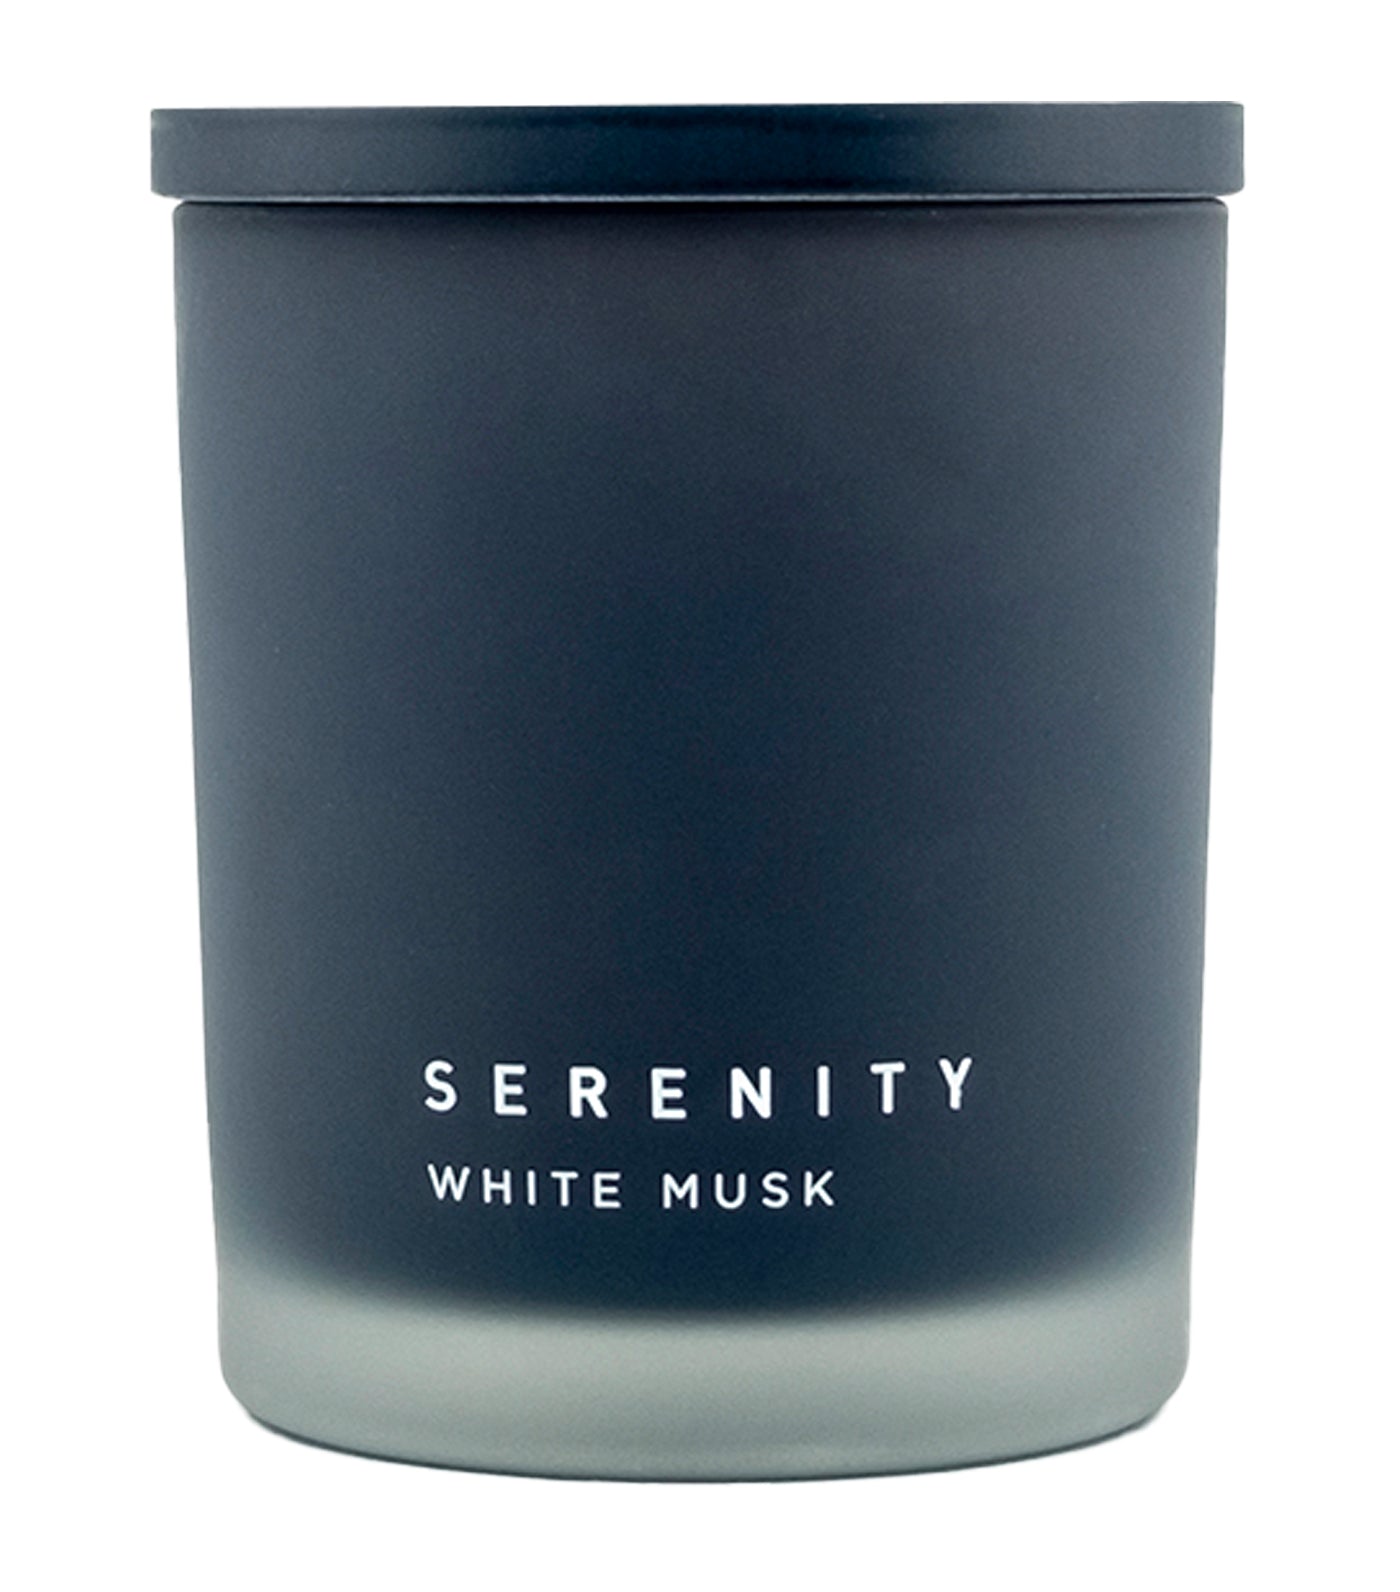 serenity white musk soy wax candle